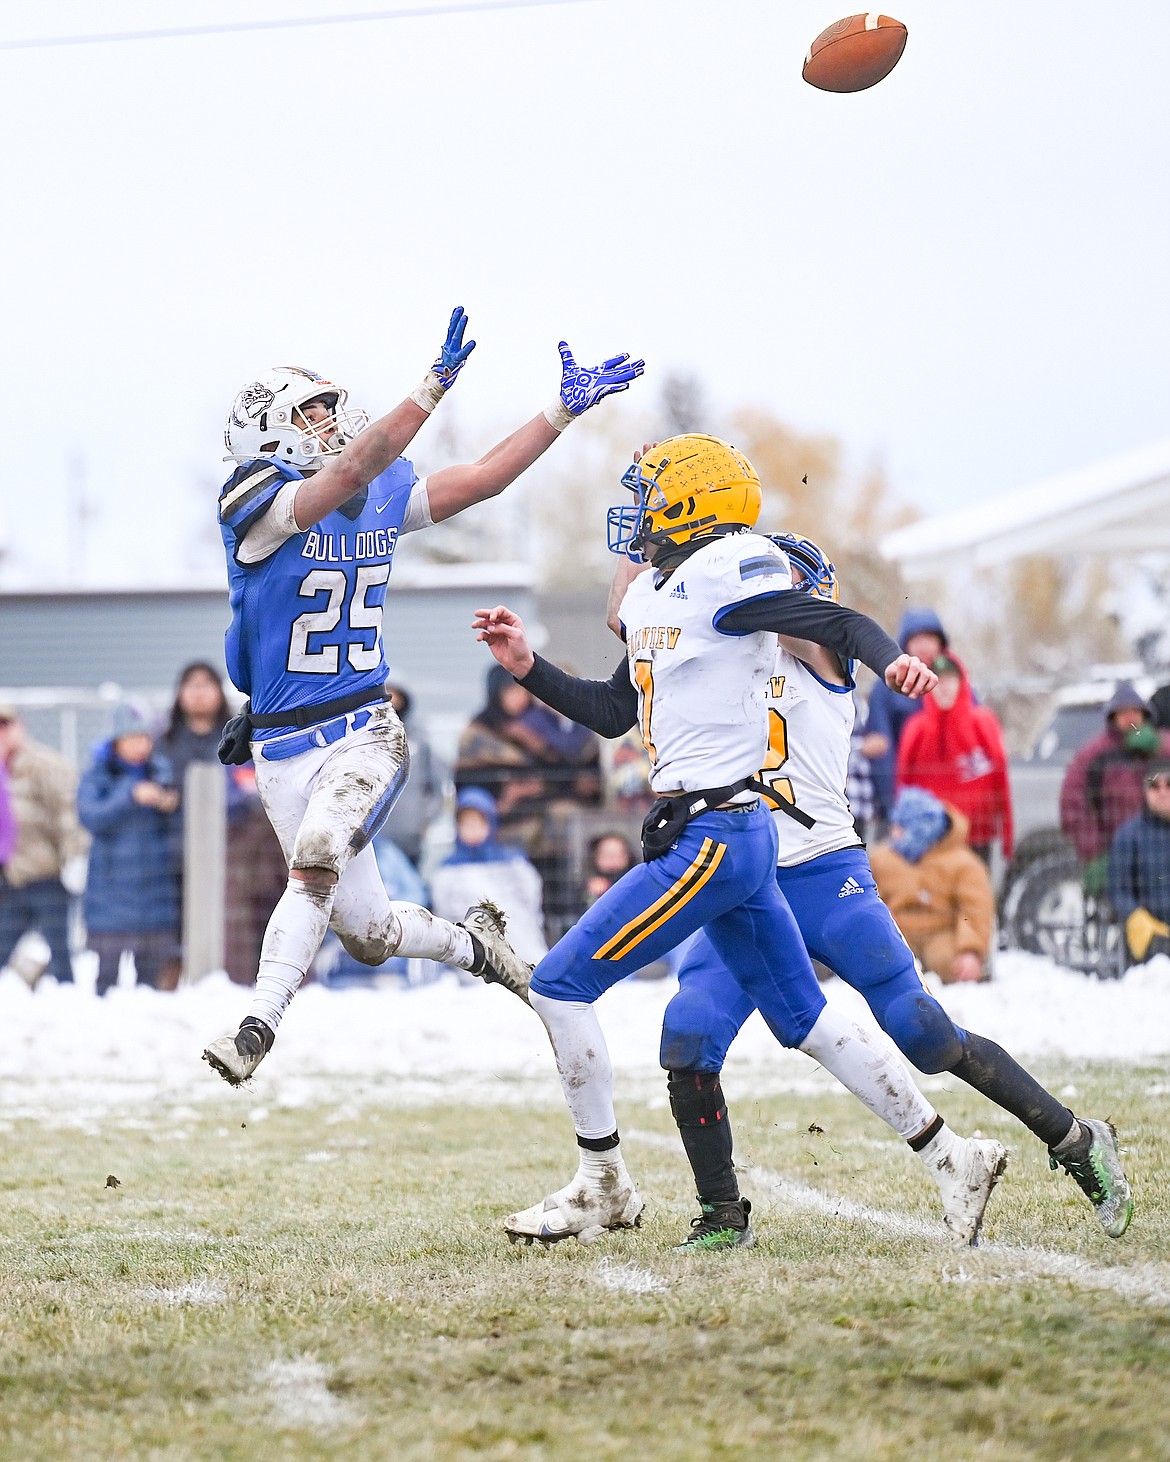 Bulldog Kenny Ness stretches for the pass in last Saturday's game. The triumphant Bulldogs take on the undefeated Belt Huskies at 1 p.m. Saurday in St. Ignatius in the state championship. (Christa Umphrey photo)